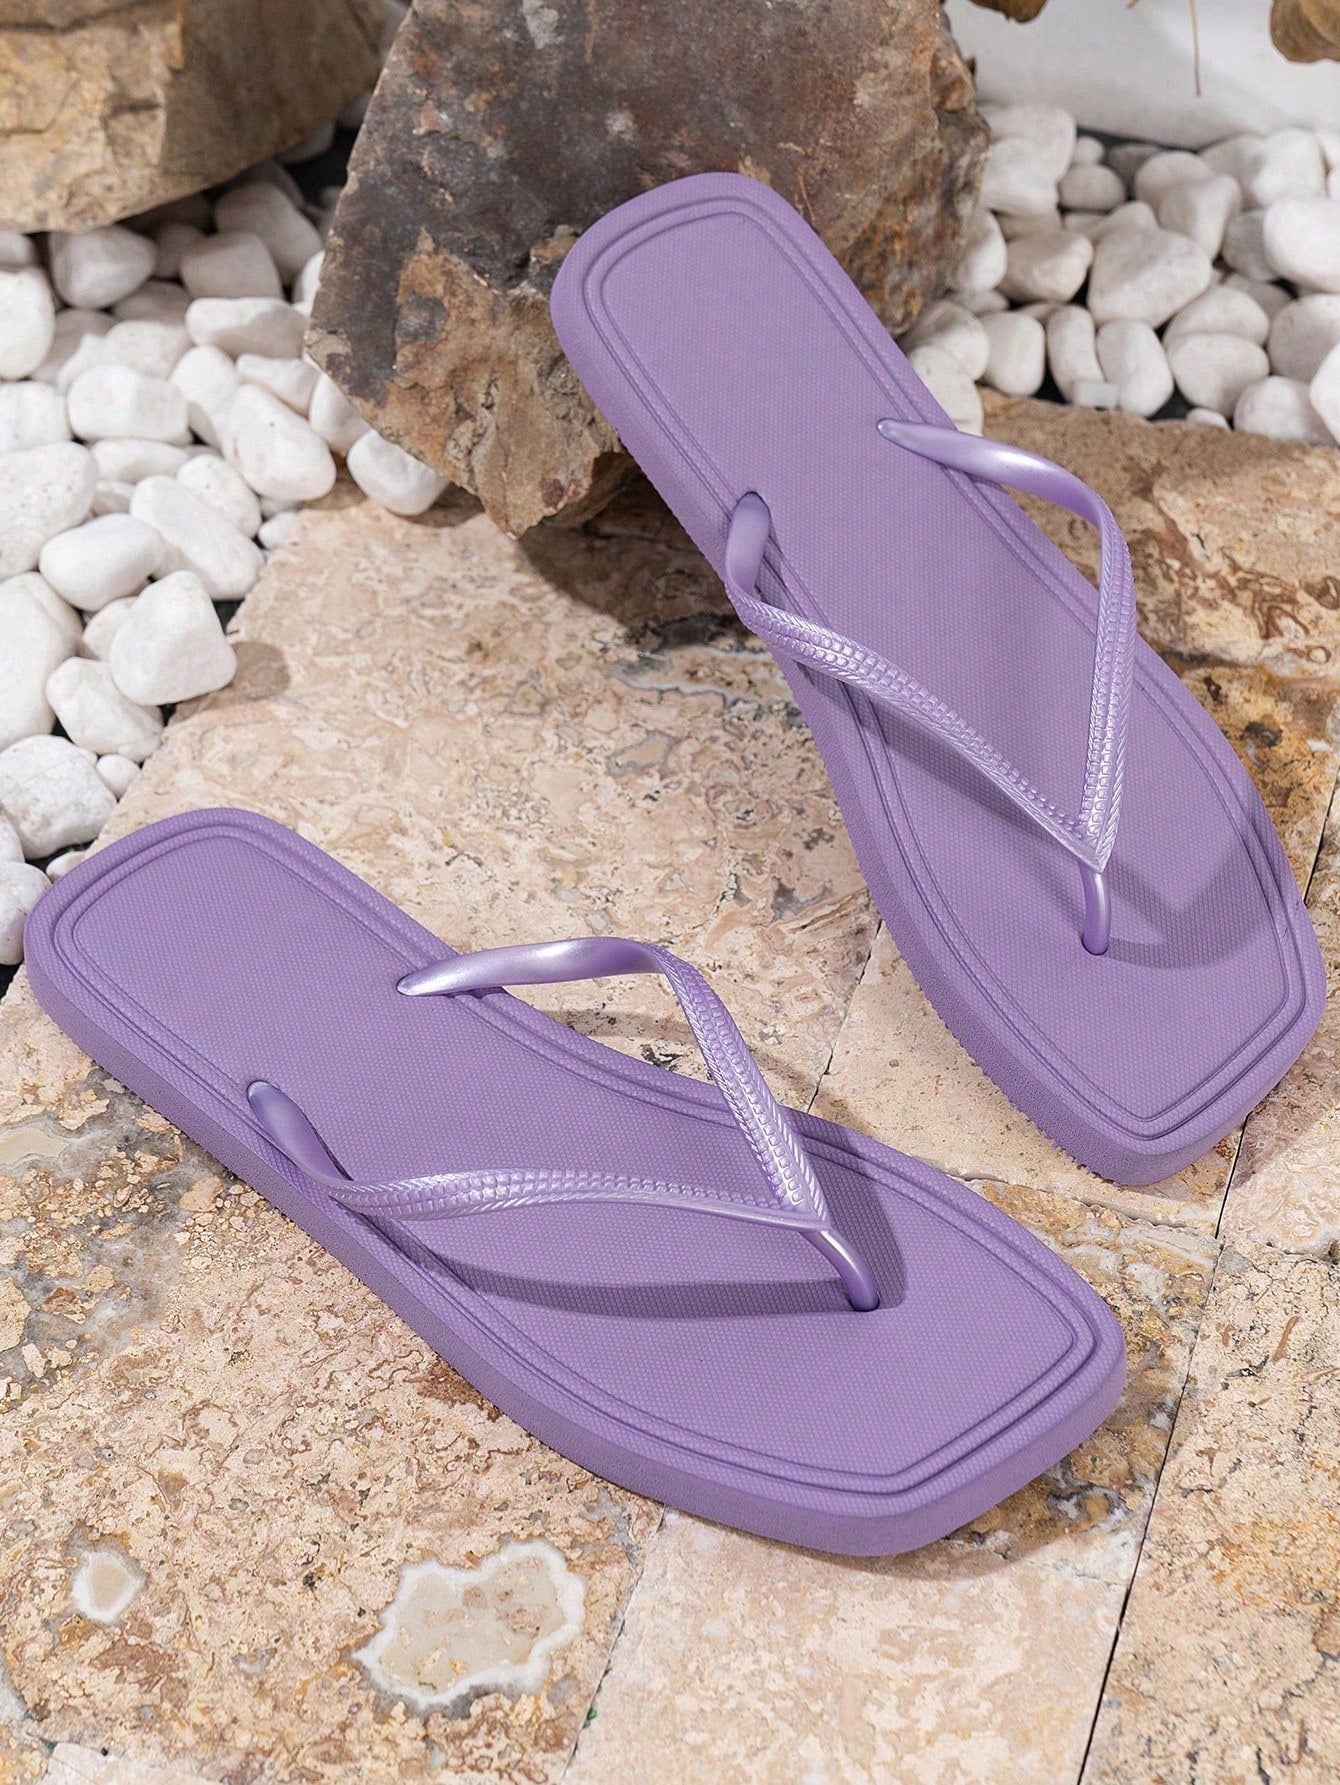 Women's Thick-Soled Flip-Flops With Rhinestone Strap, Lightweight & Comfortable, Non-Slip, Perfect For Beach, Swimming And Holidays, Waterproof Eva Material.-Purple-1